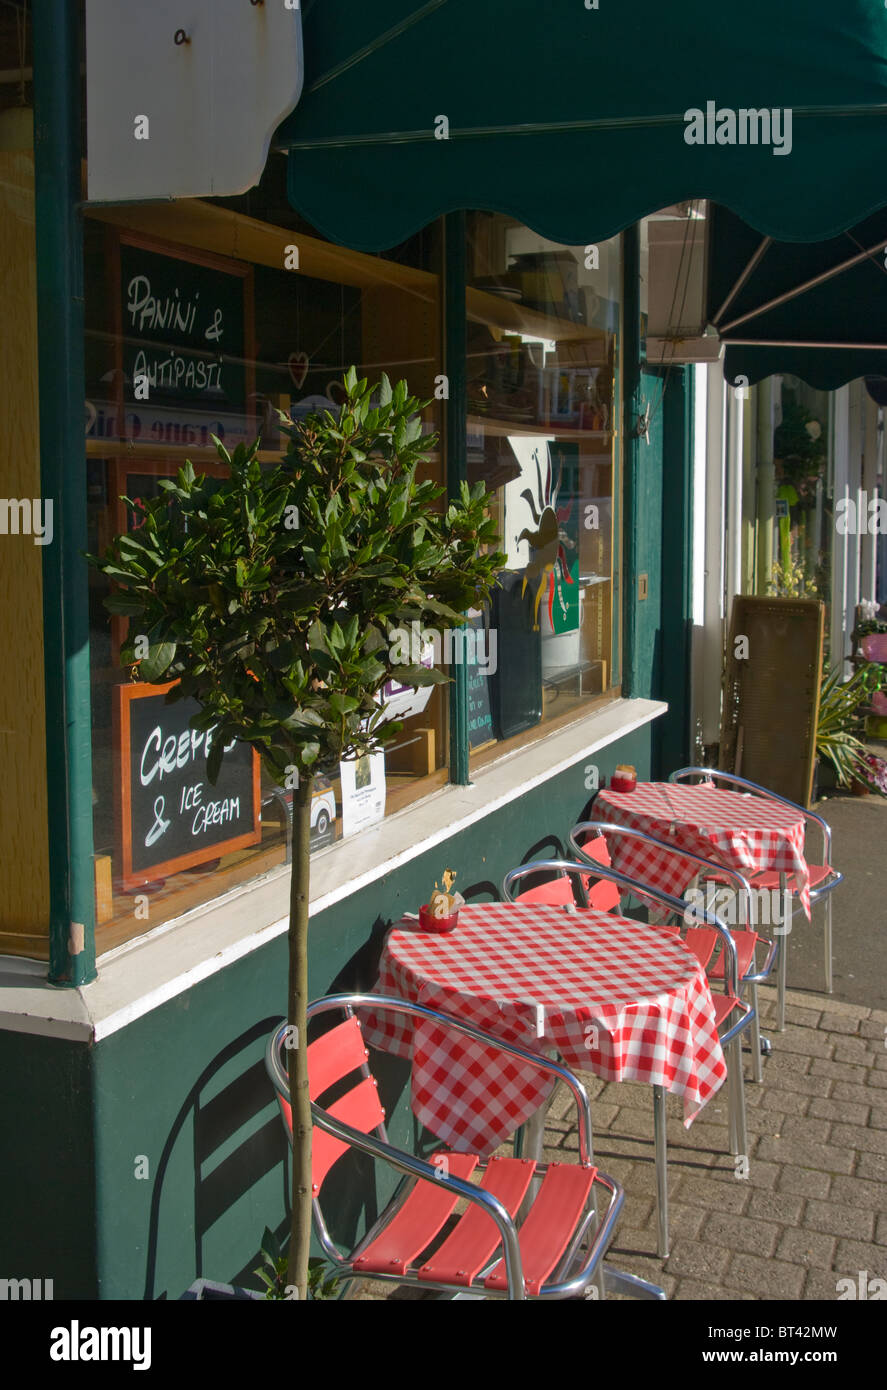 Cafe Pavement Tables And Chairs With Red And White Check Cloths Stock Photo